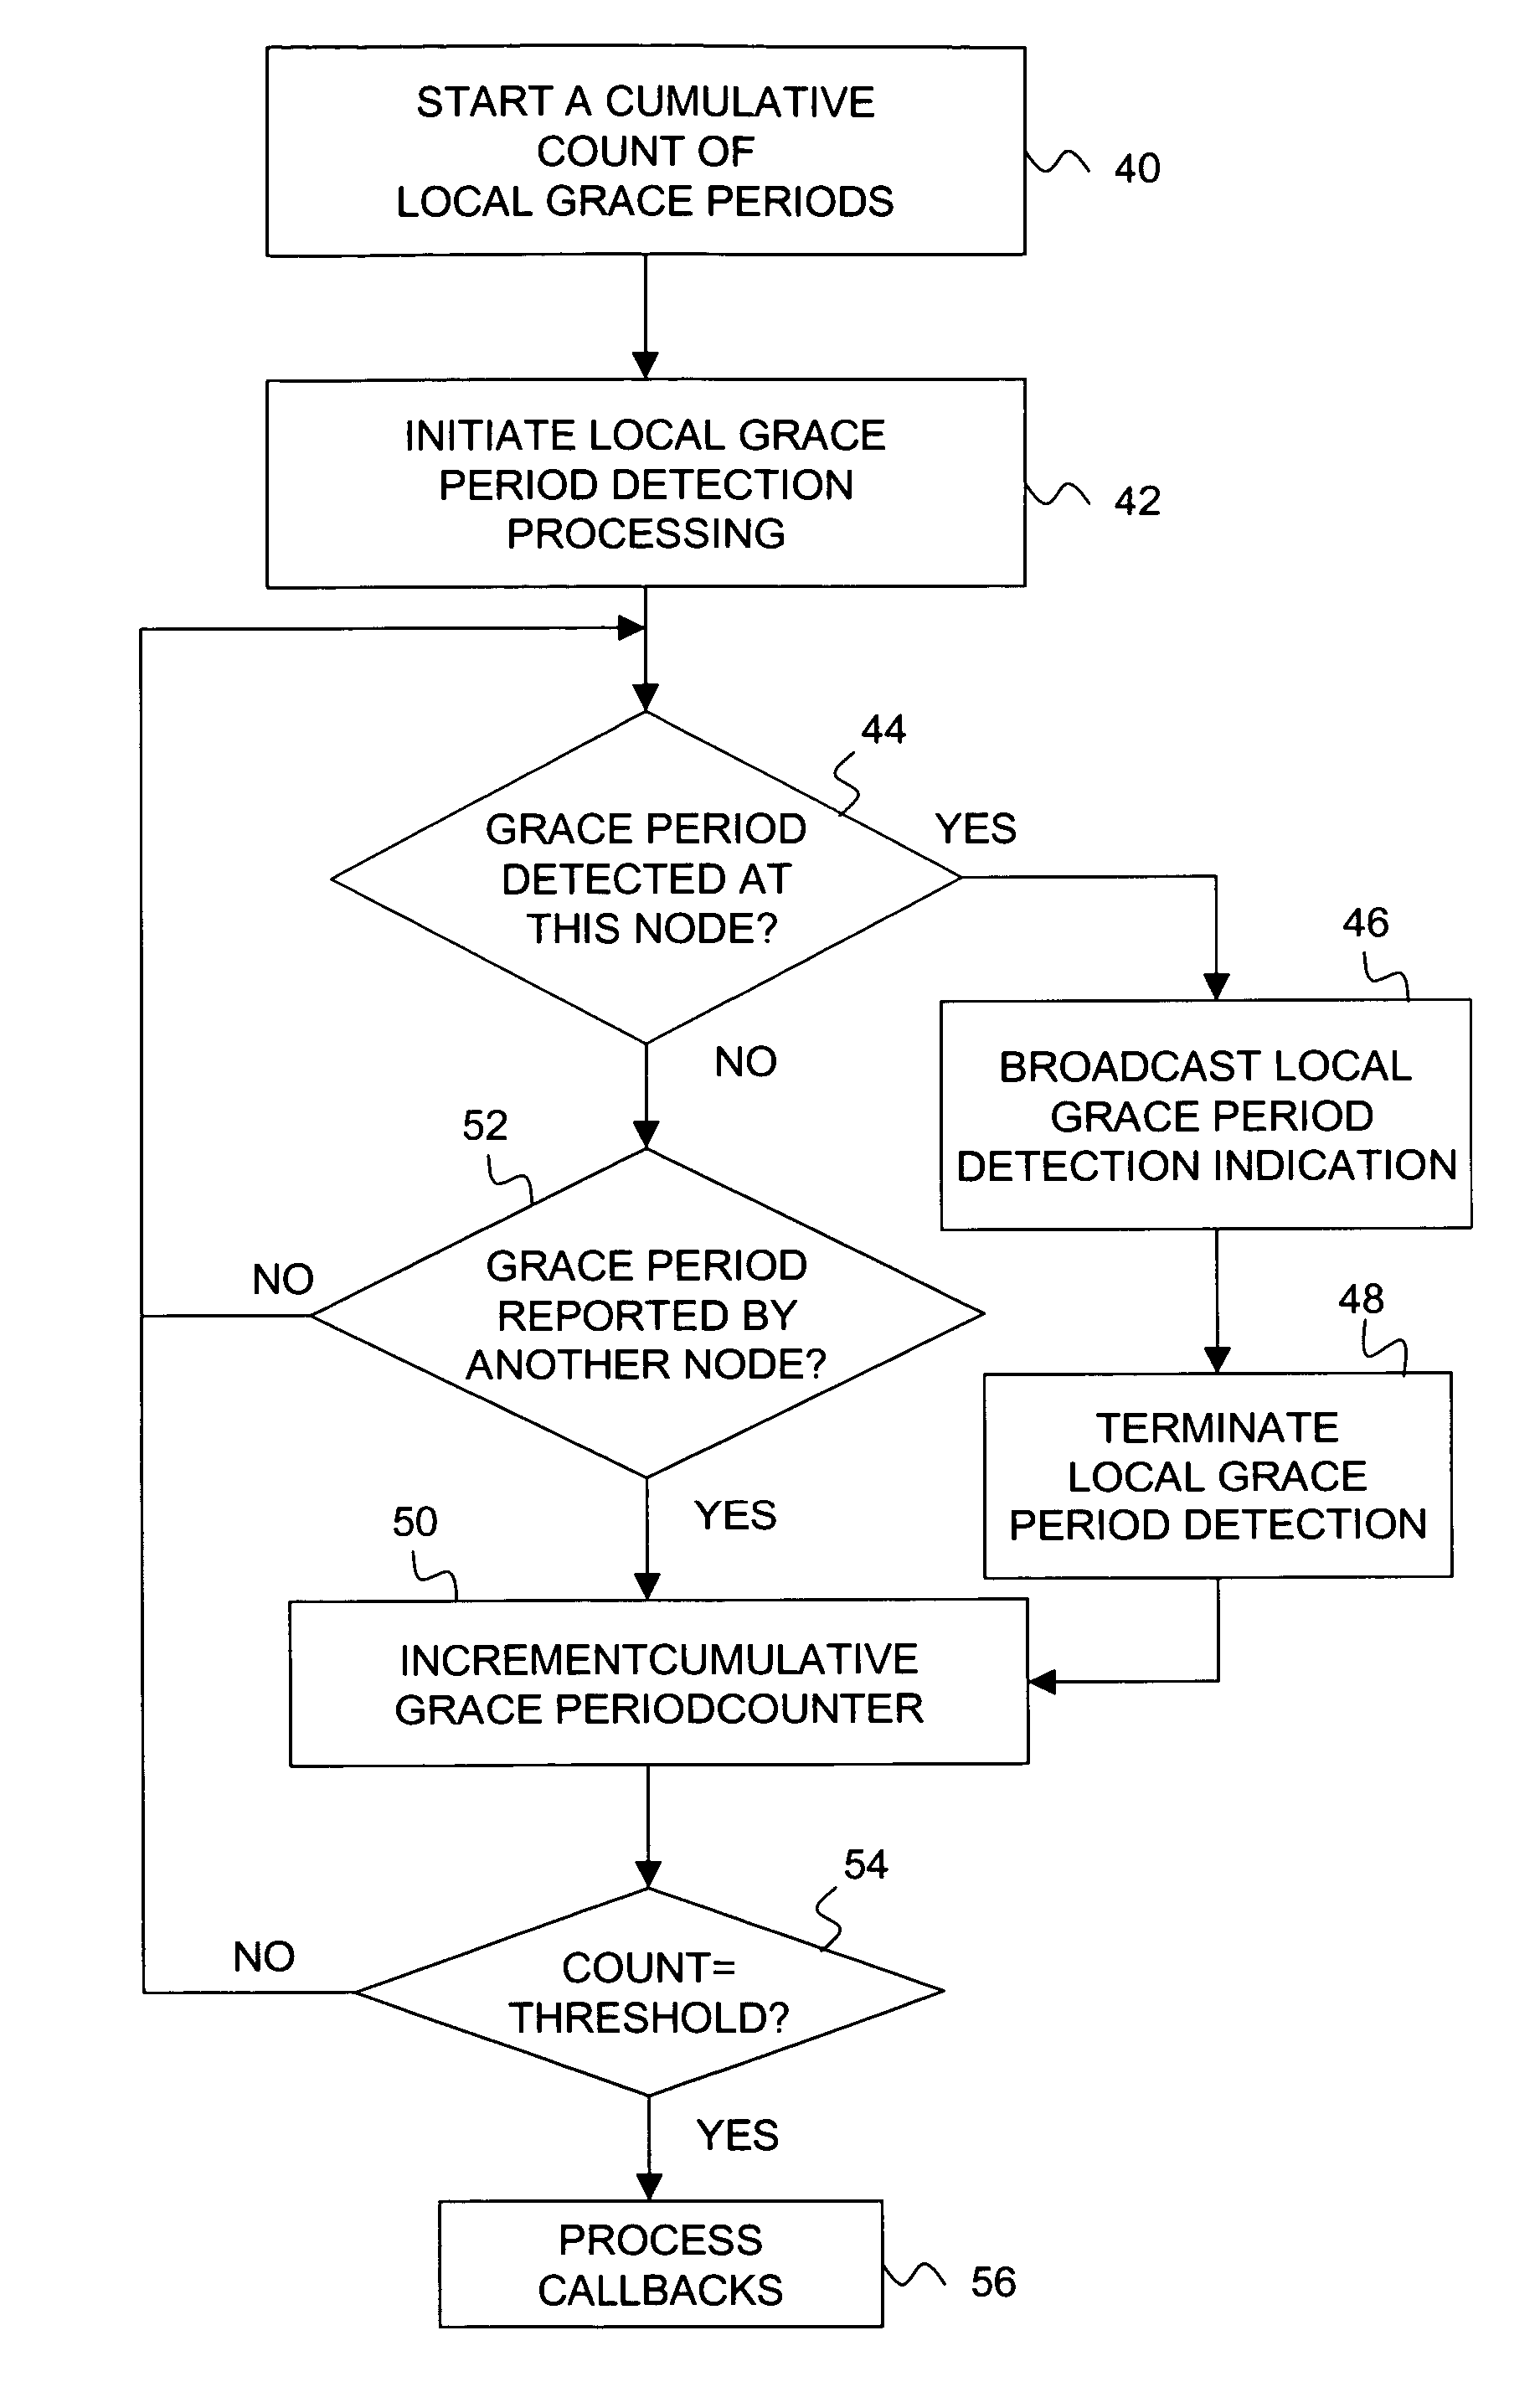 Cluster-wide read-copy update system and method